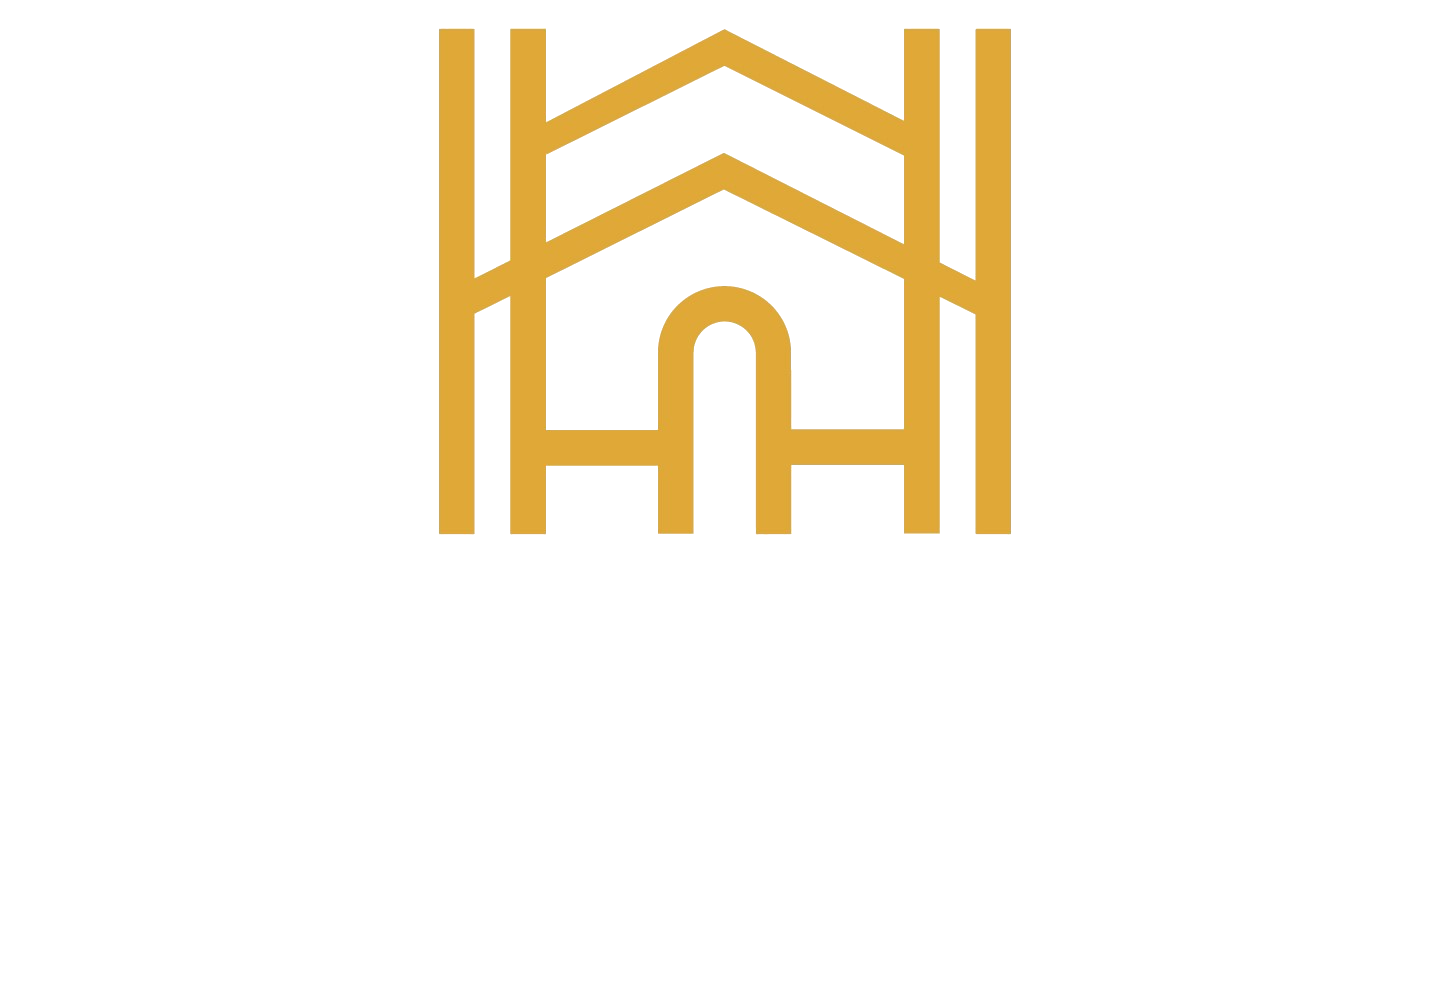 Hetsons Property Group Limited